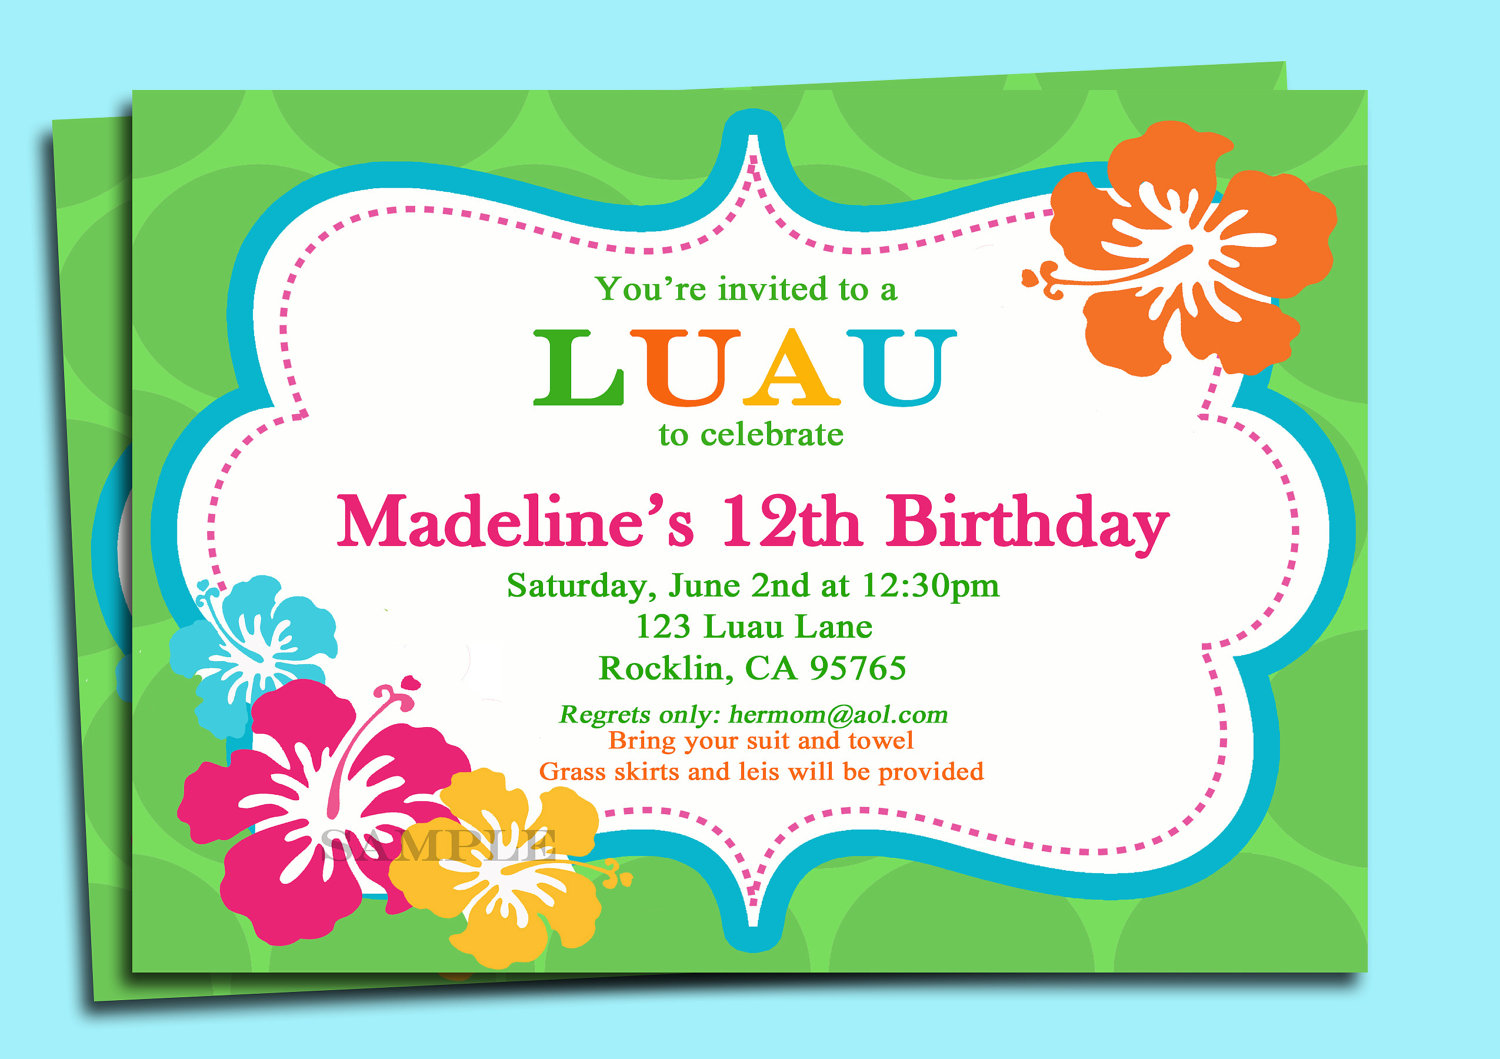 Luau Invitation Printable Personalized For Your By Thatpartychick